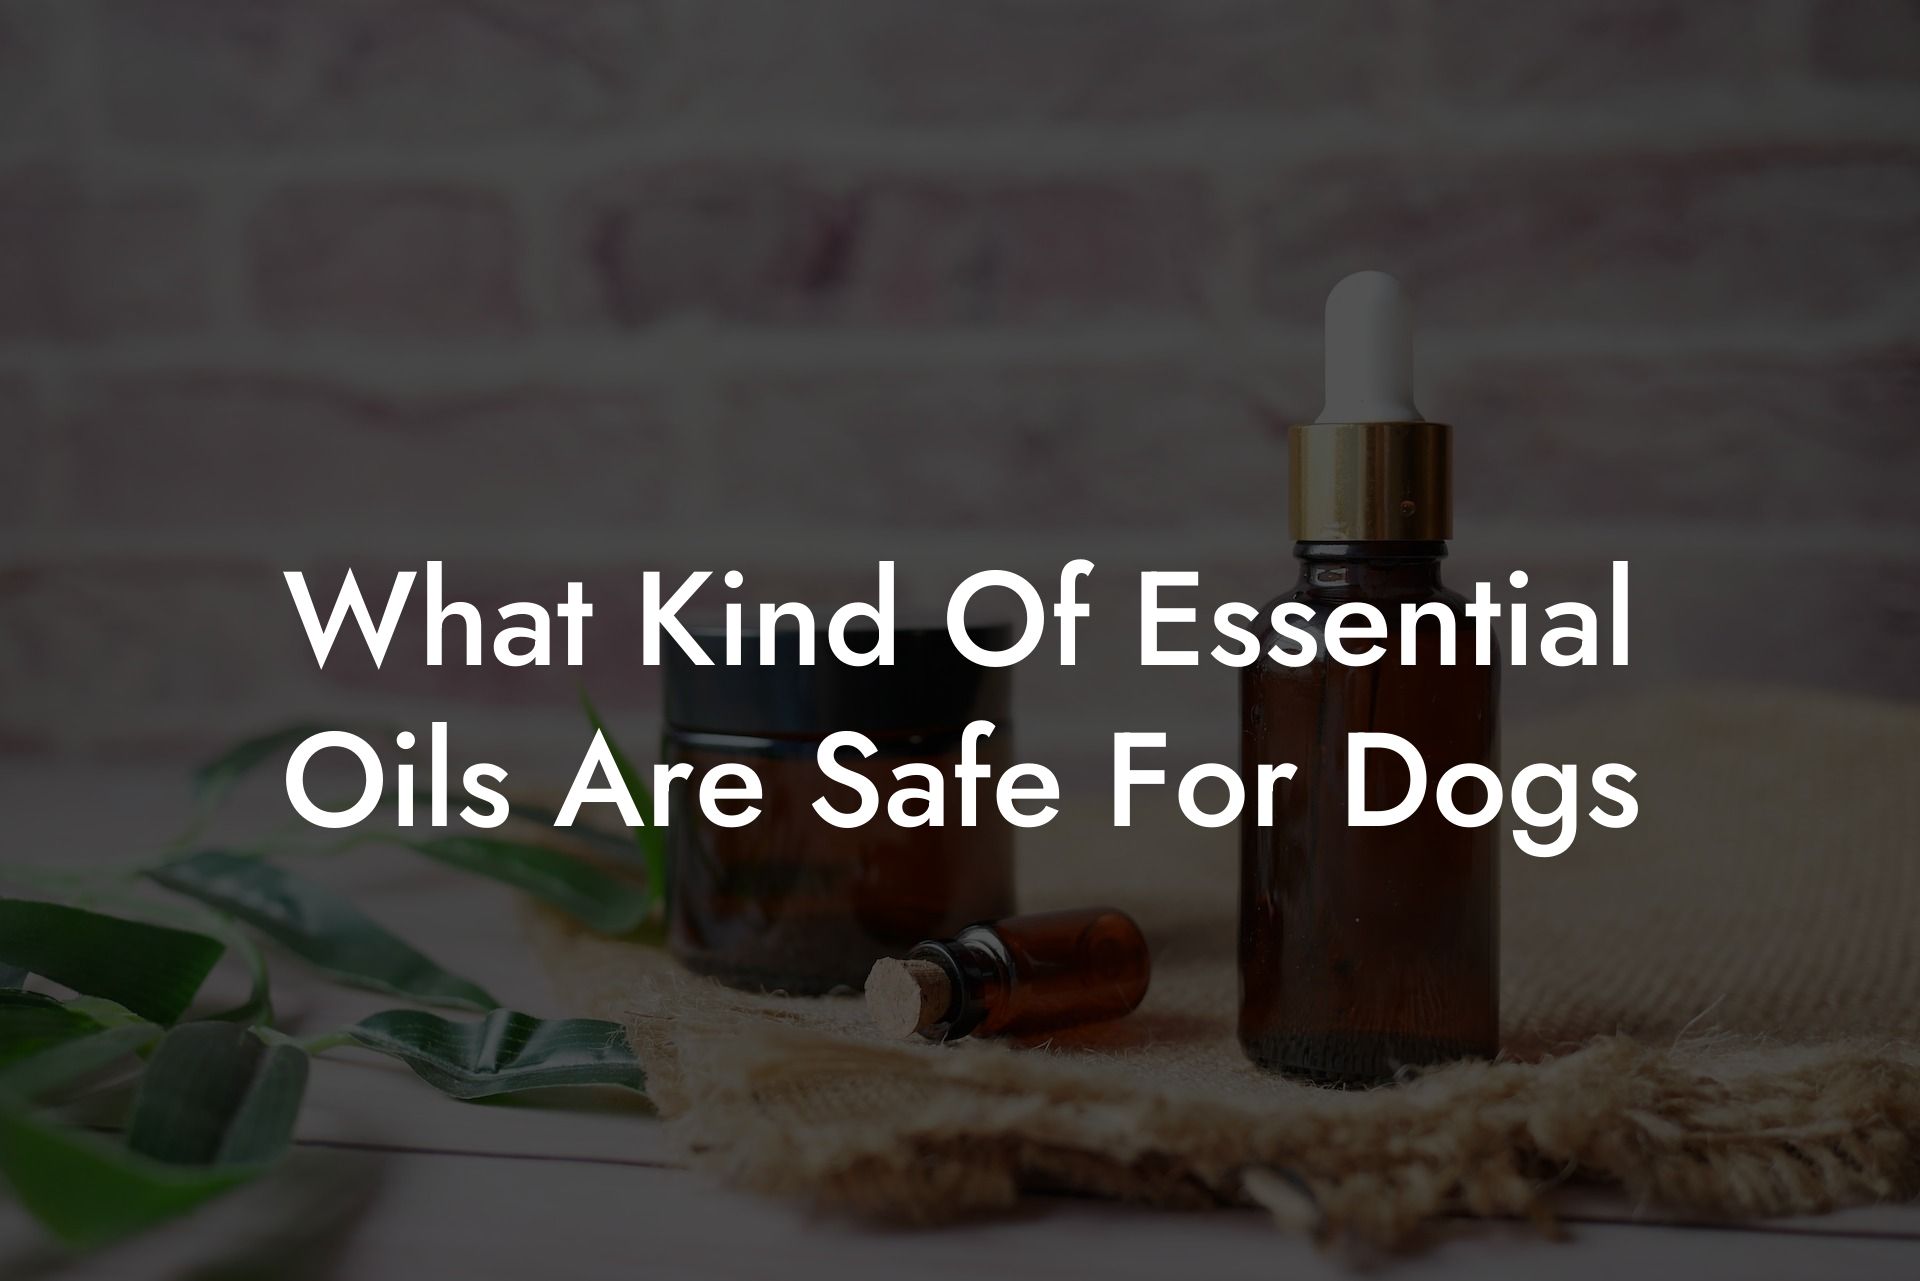 What Kind Of Essential Oils Are Safe For Dogs